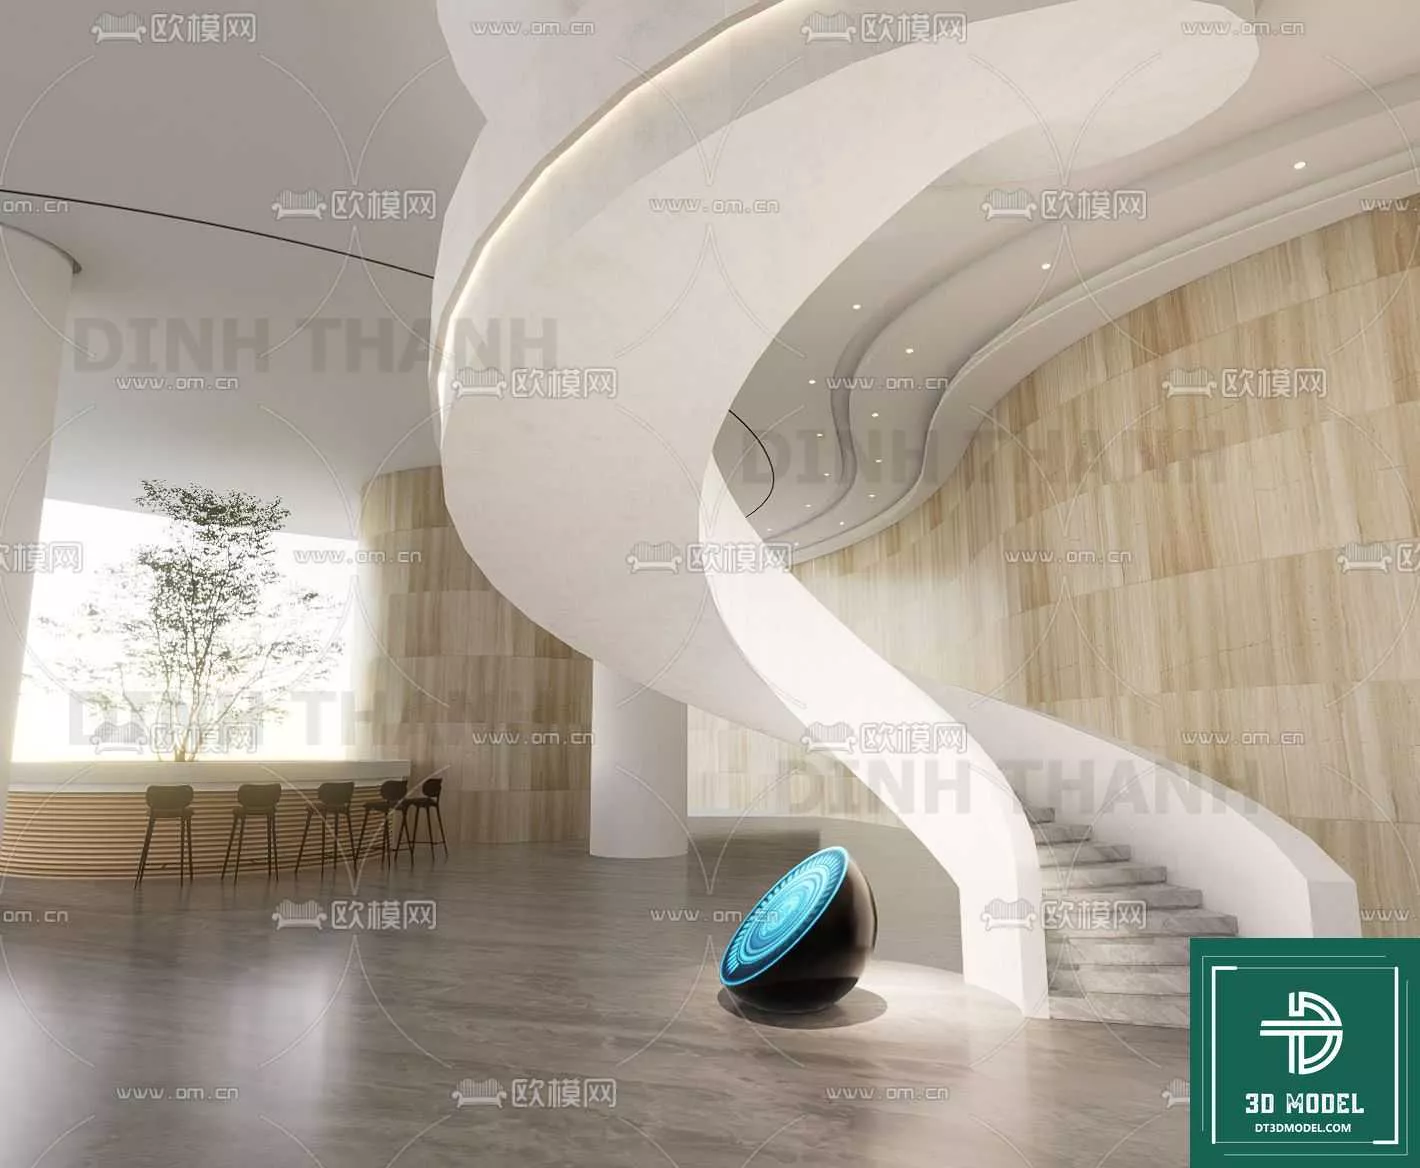 MODERN STAIR - SKETCHUP 3D MODEL - VRAY OR ENSCAPE - ID14299